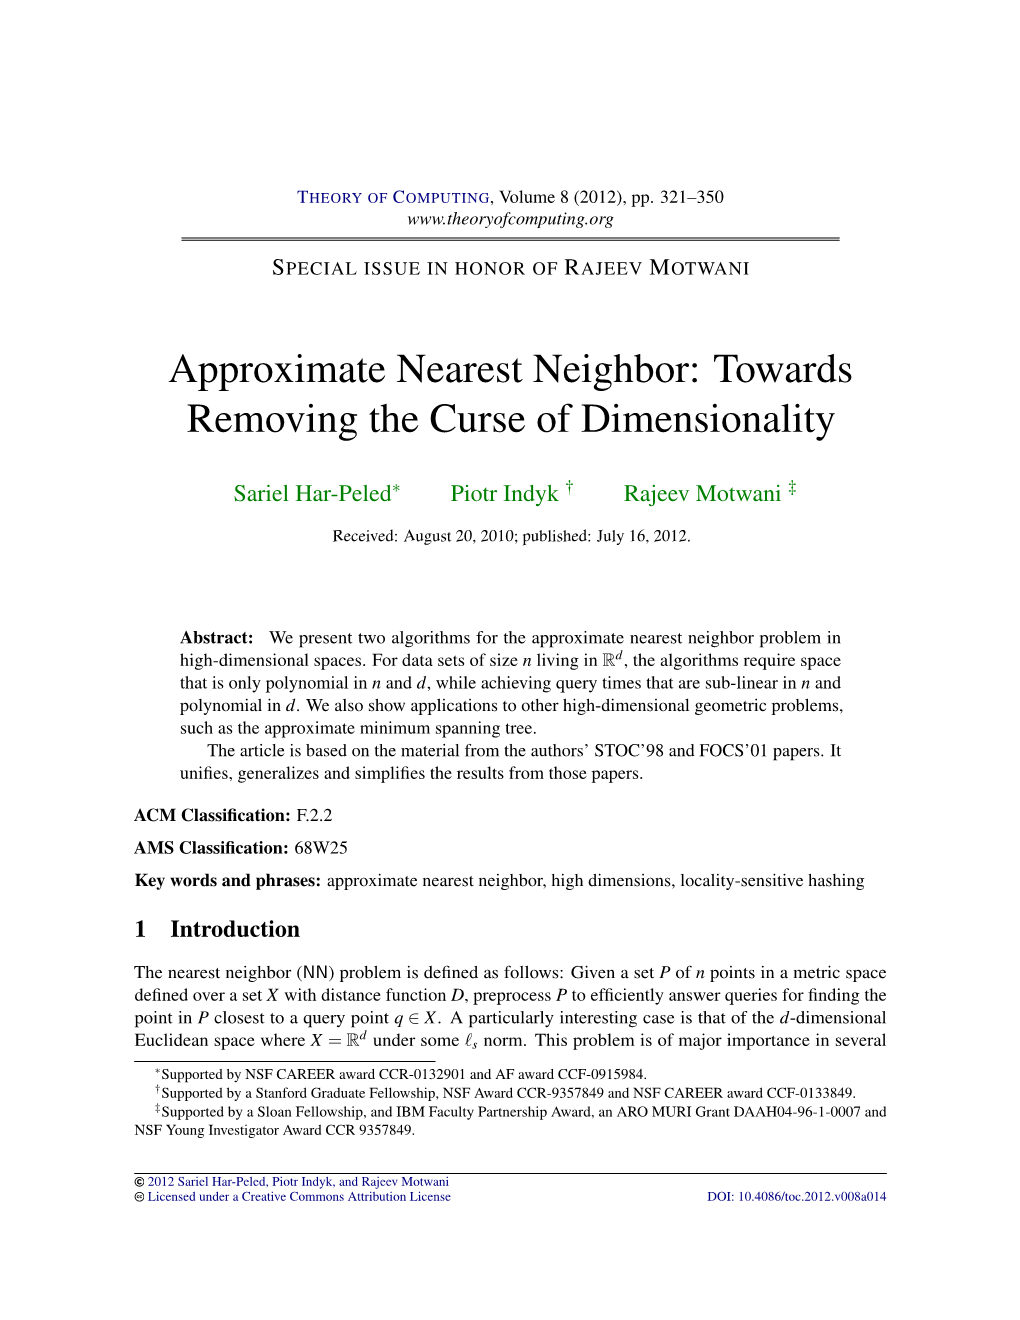 Approximate Nearest Neighbor: Towards Removing the Curse of Dimensionality